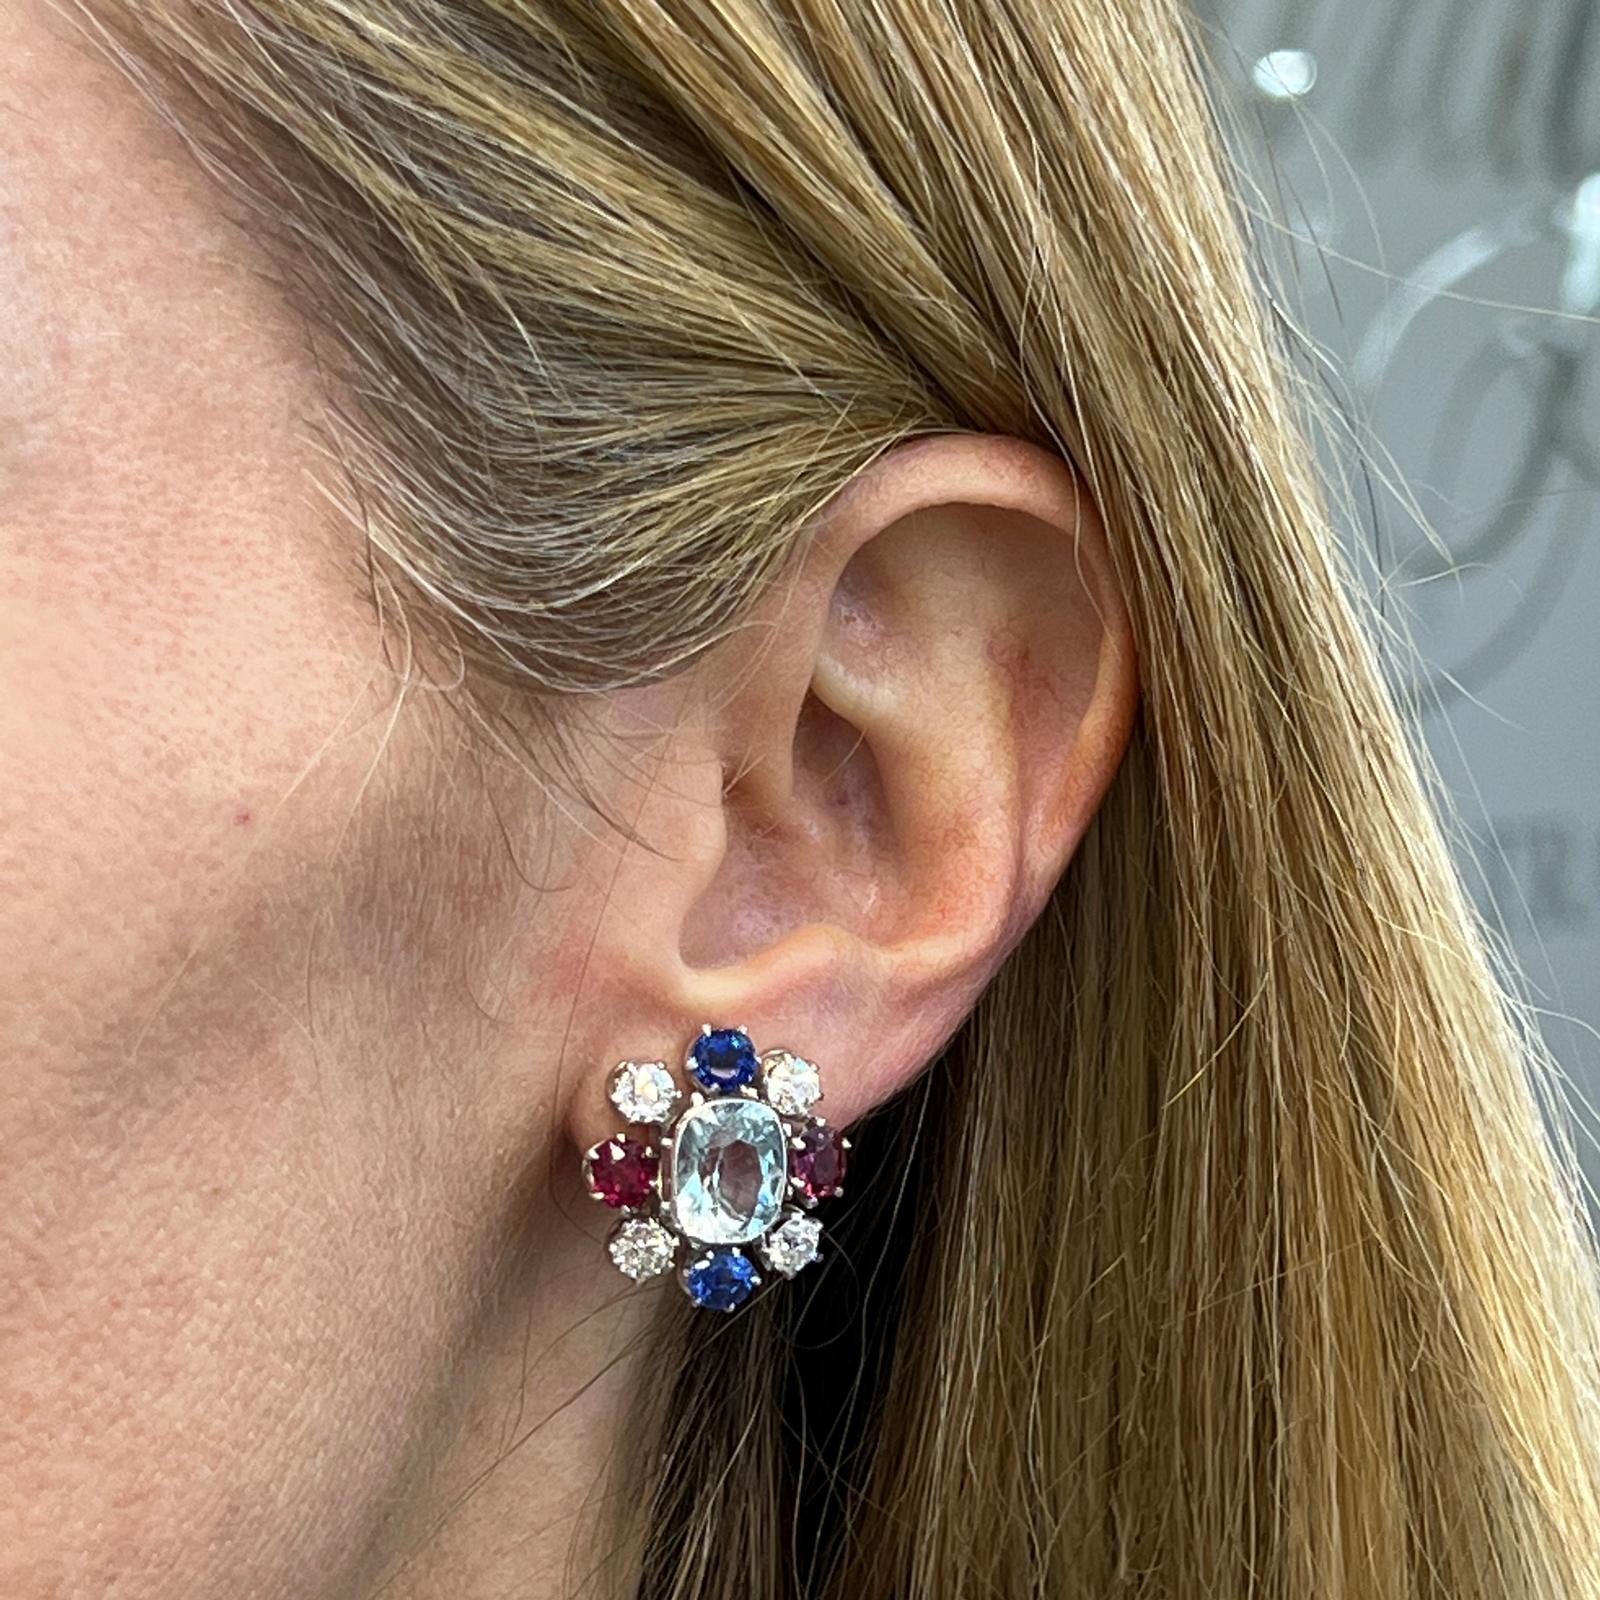 Fabulous and beautifully preserved aquamarine, diamond, ruby, and sapphire earrings fashioned in 14 karat white gold. These turn of the century earrings feature 2 oval aquamarine gemstones weighing approximately 6.00 CTW. The aquamarines are bezel